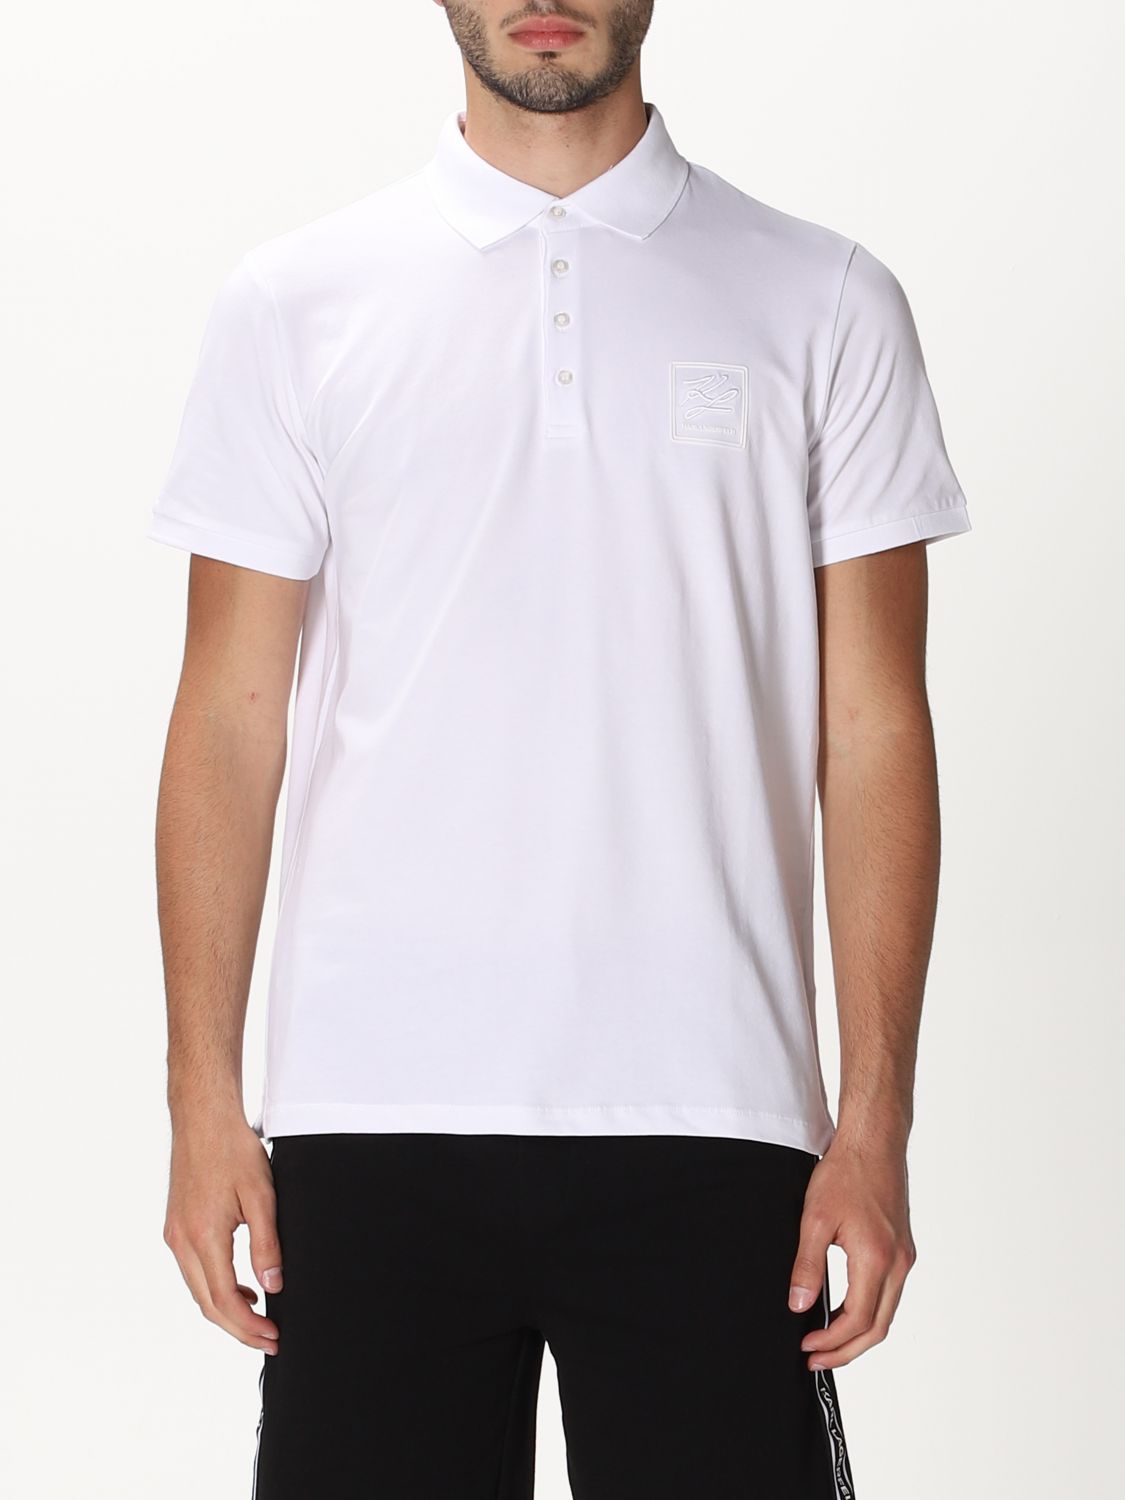 Karl Lagerfeld Outlet: polo shirt for man - White | Karl Lagerfeld polo ...